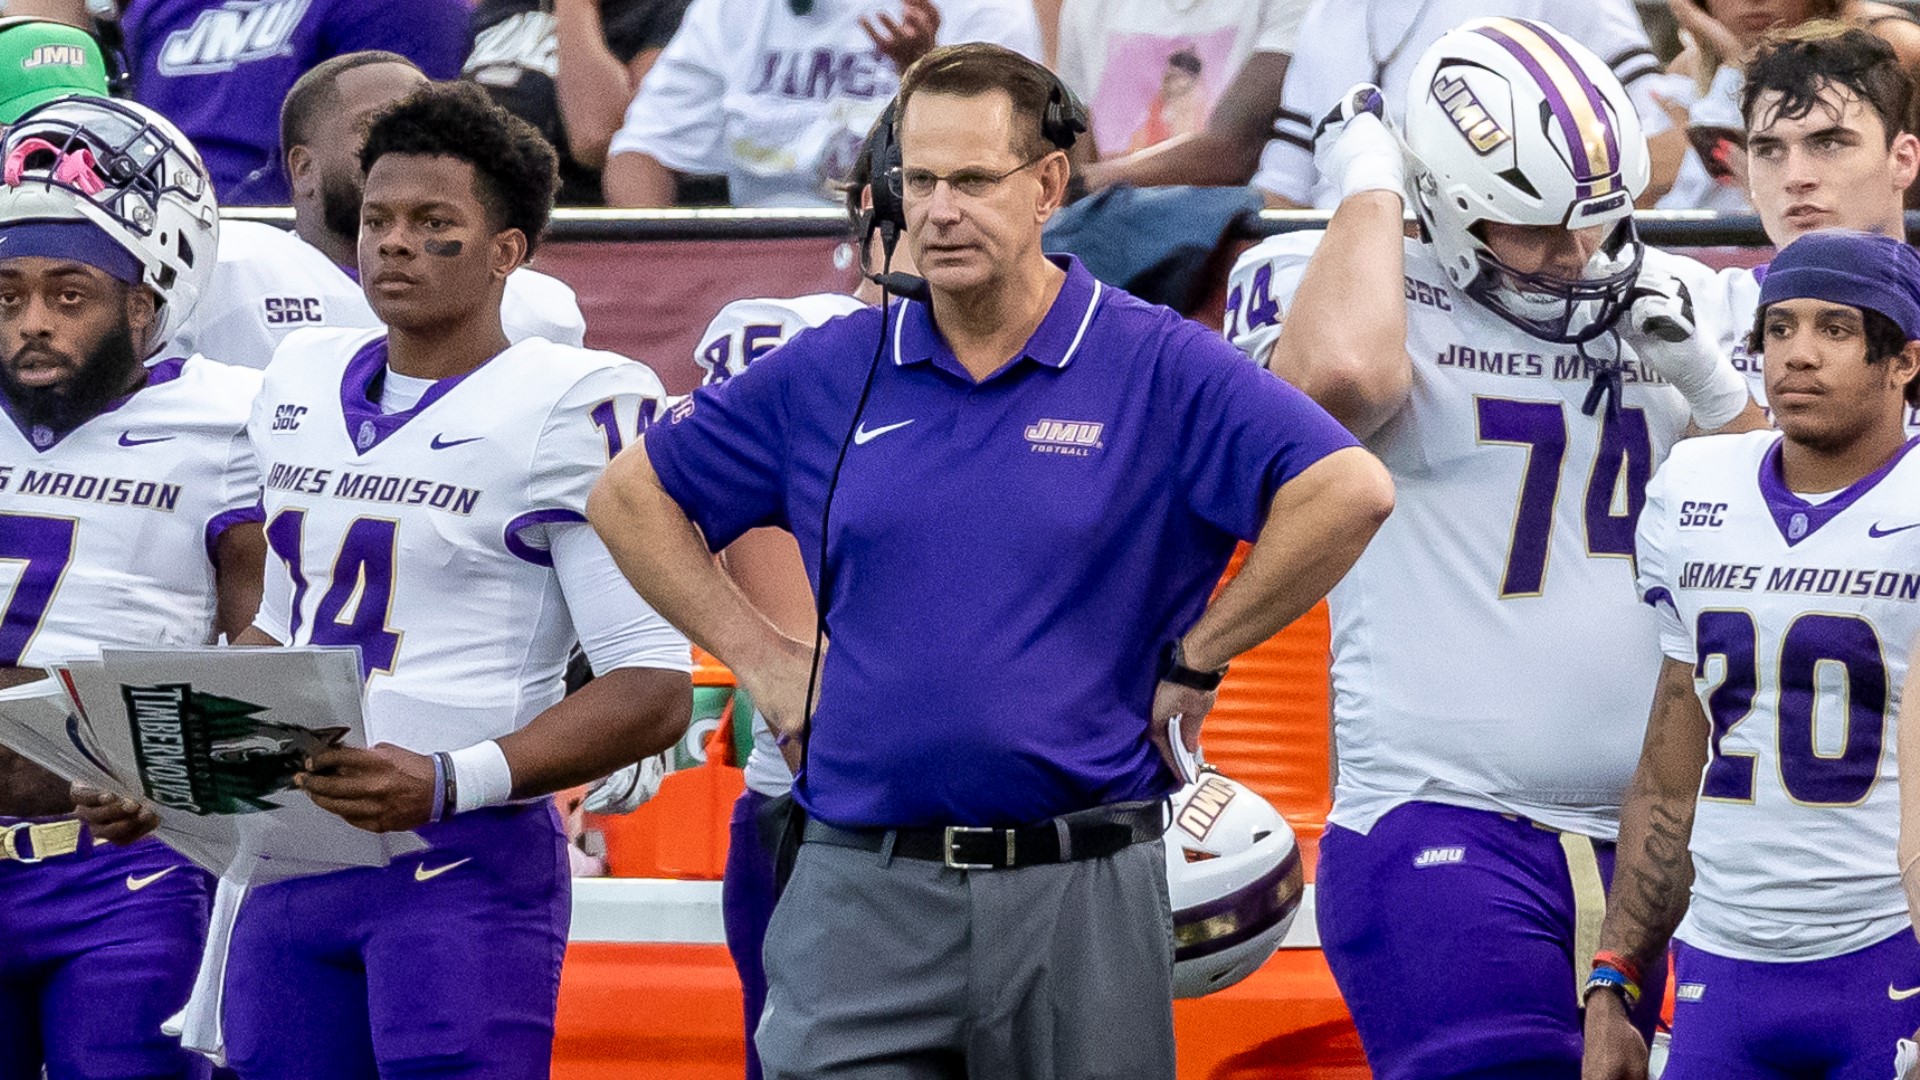 Cignetti was the 2017 CAA coach of the year and finished in the top six in balloting for the Eddie Robinson Award, which is presented to the nation's top FCS coach.